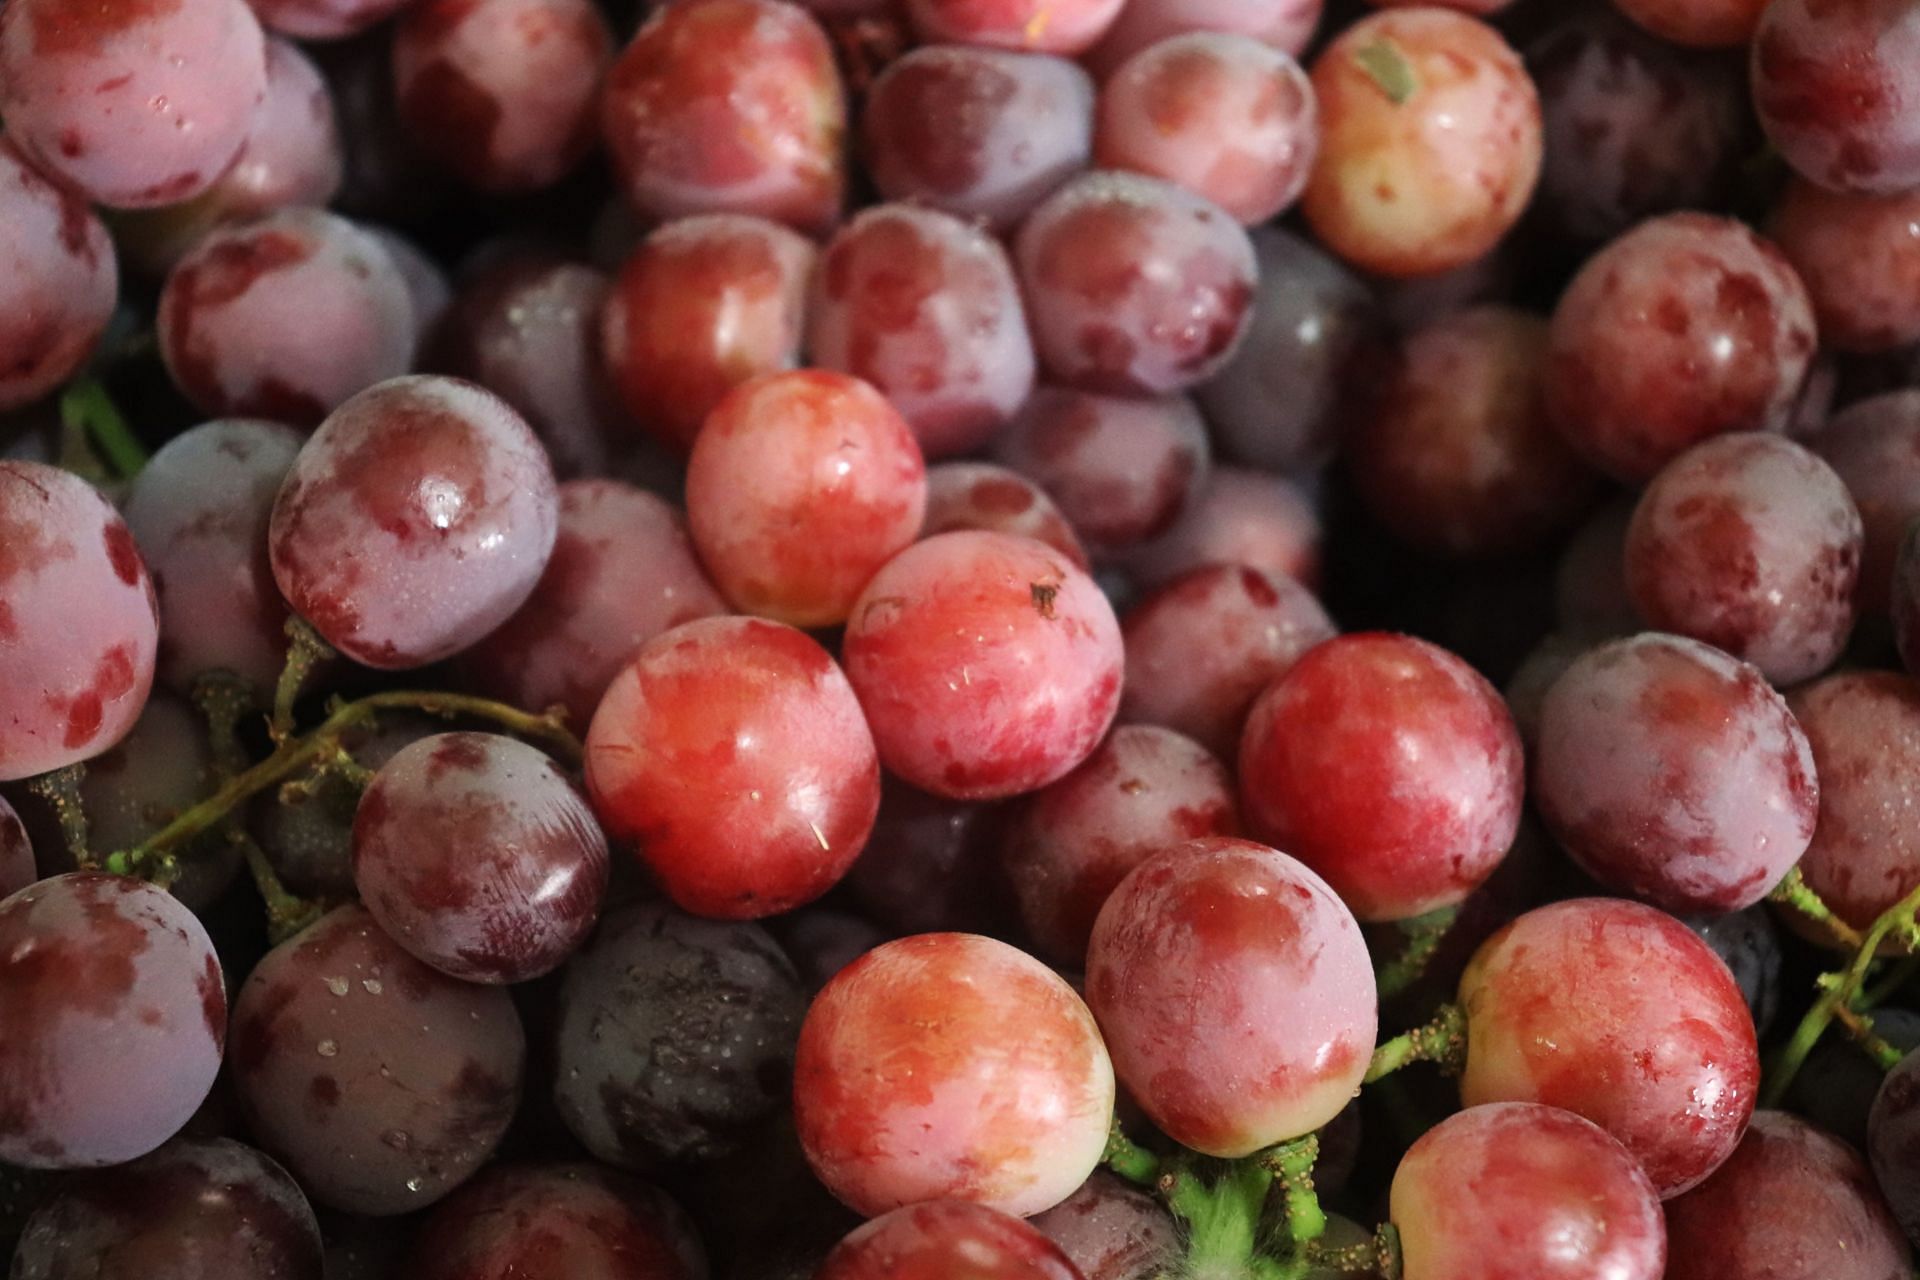 Red grapes can protect the body from free radicals. (Image via Unsplash/Mufid Majnun)